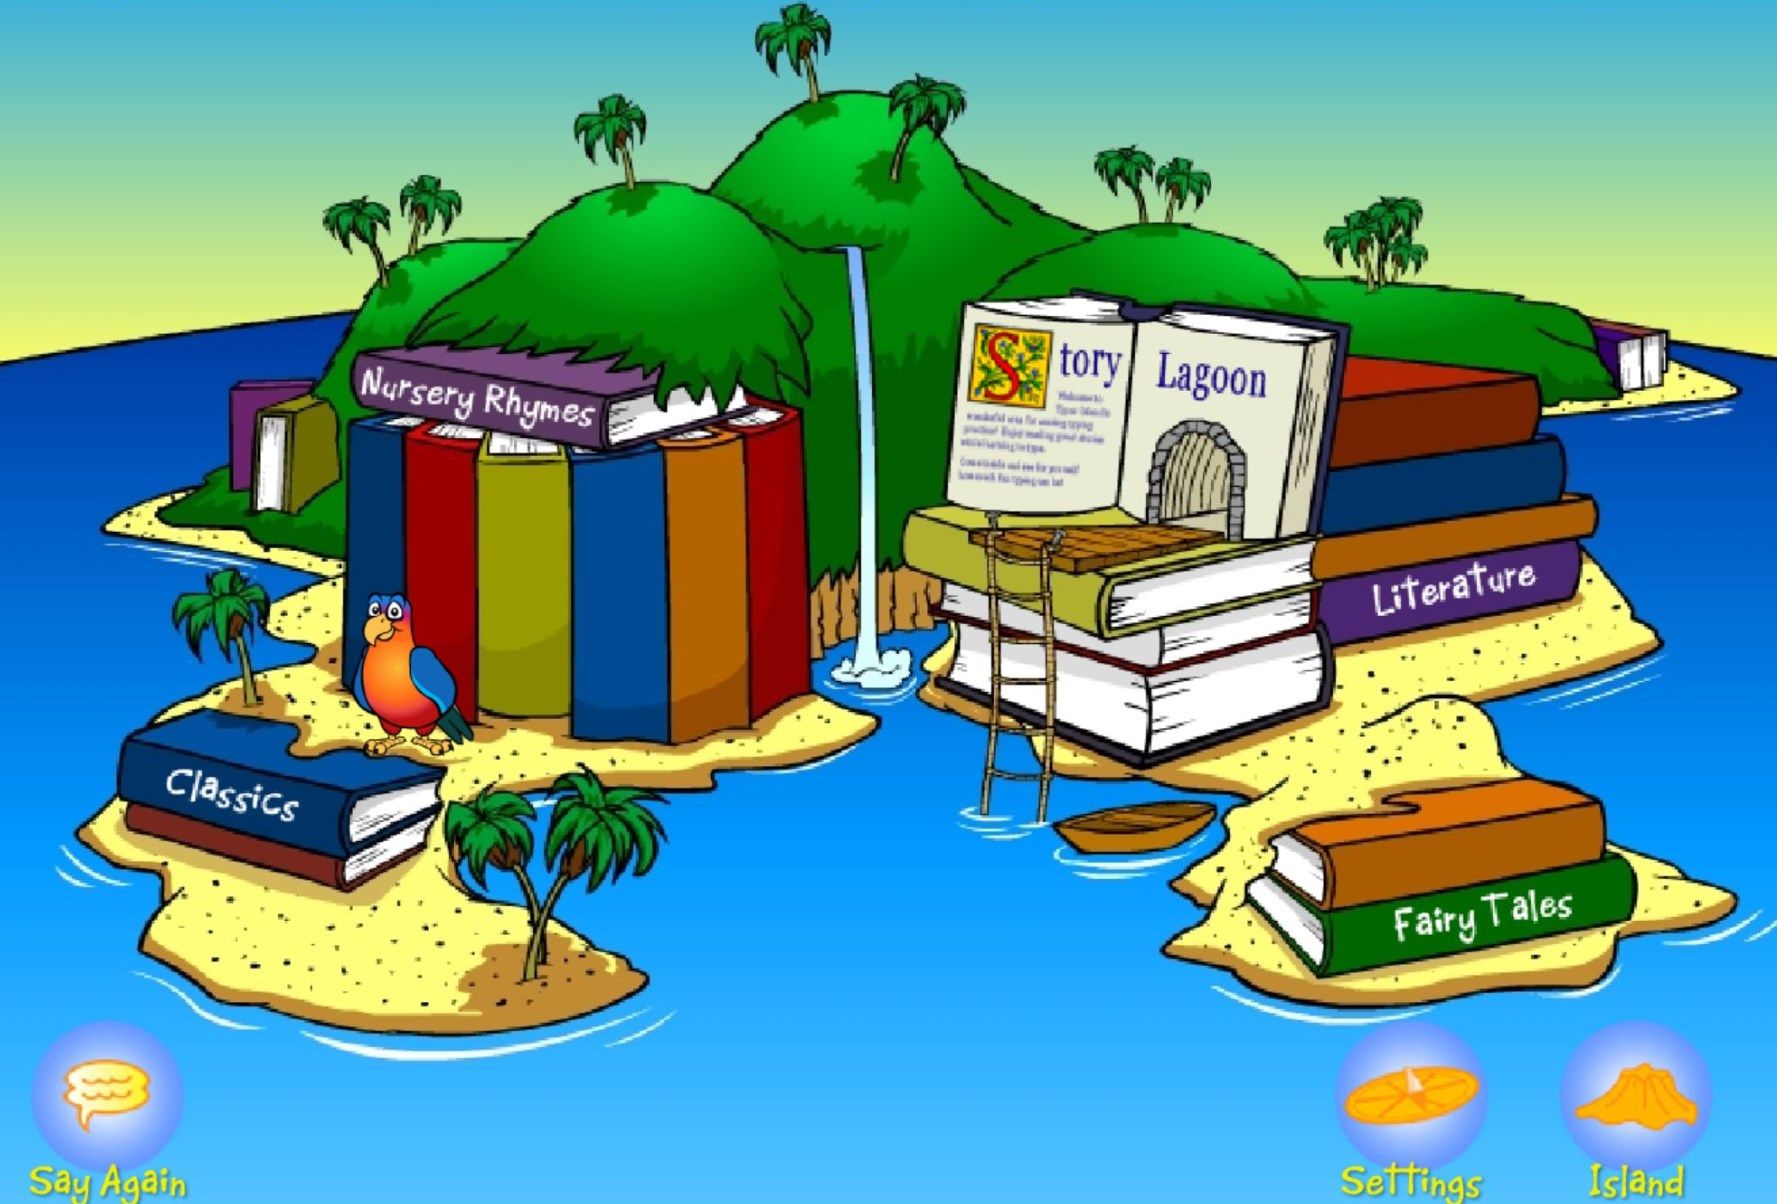 Learn proven typing methods to advance your skills in Story Lagoon.